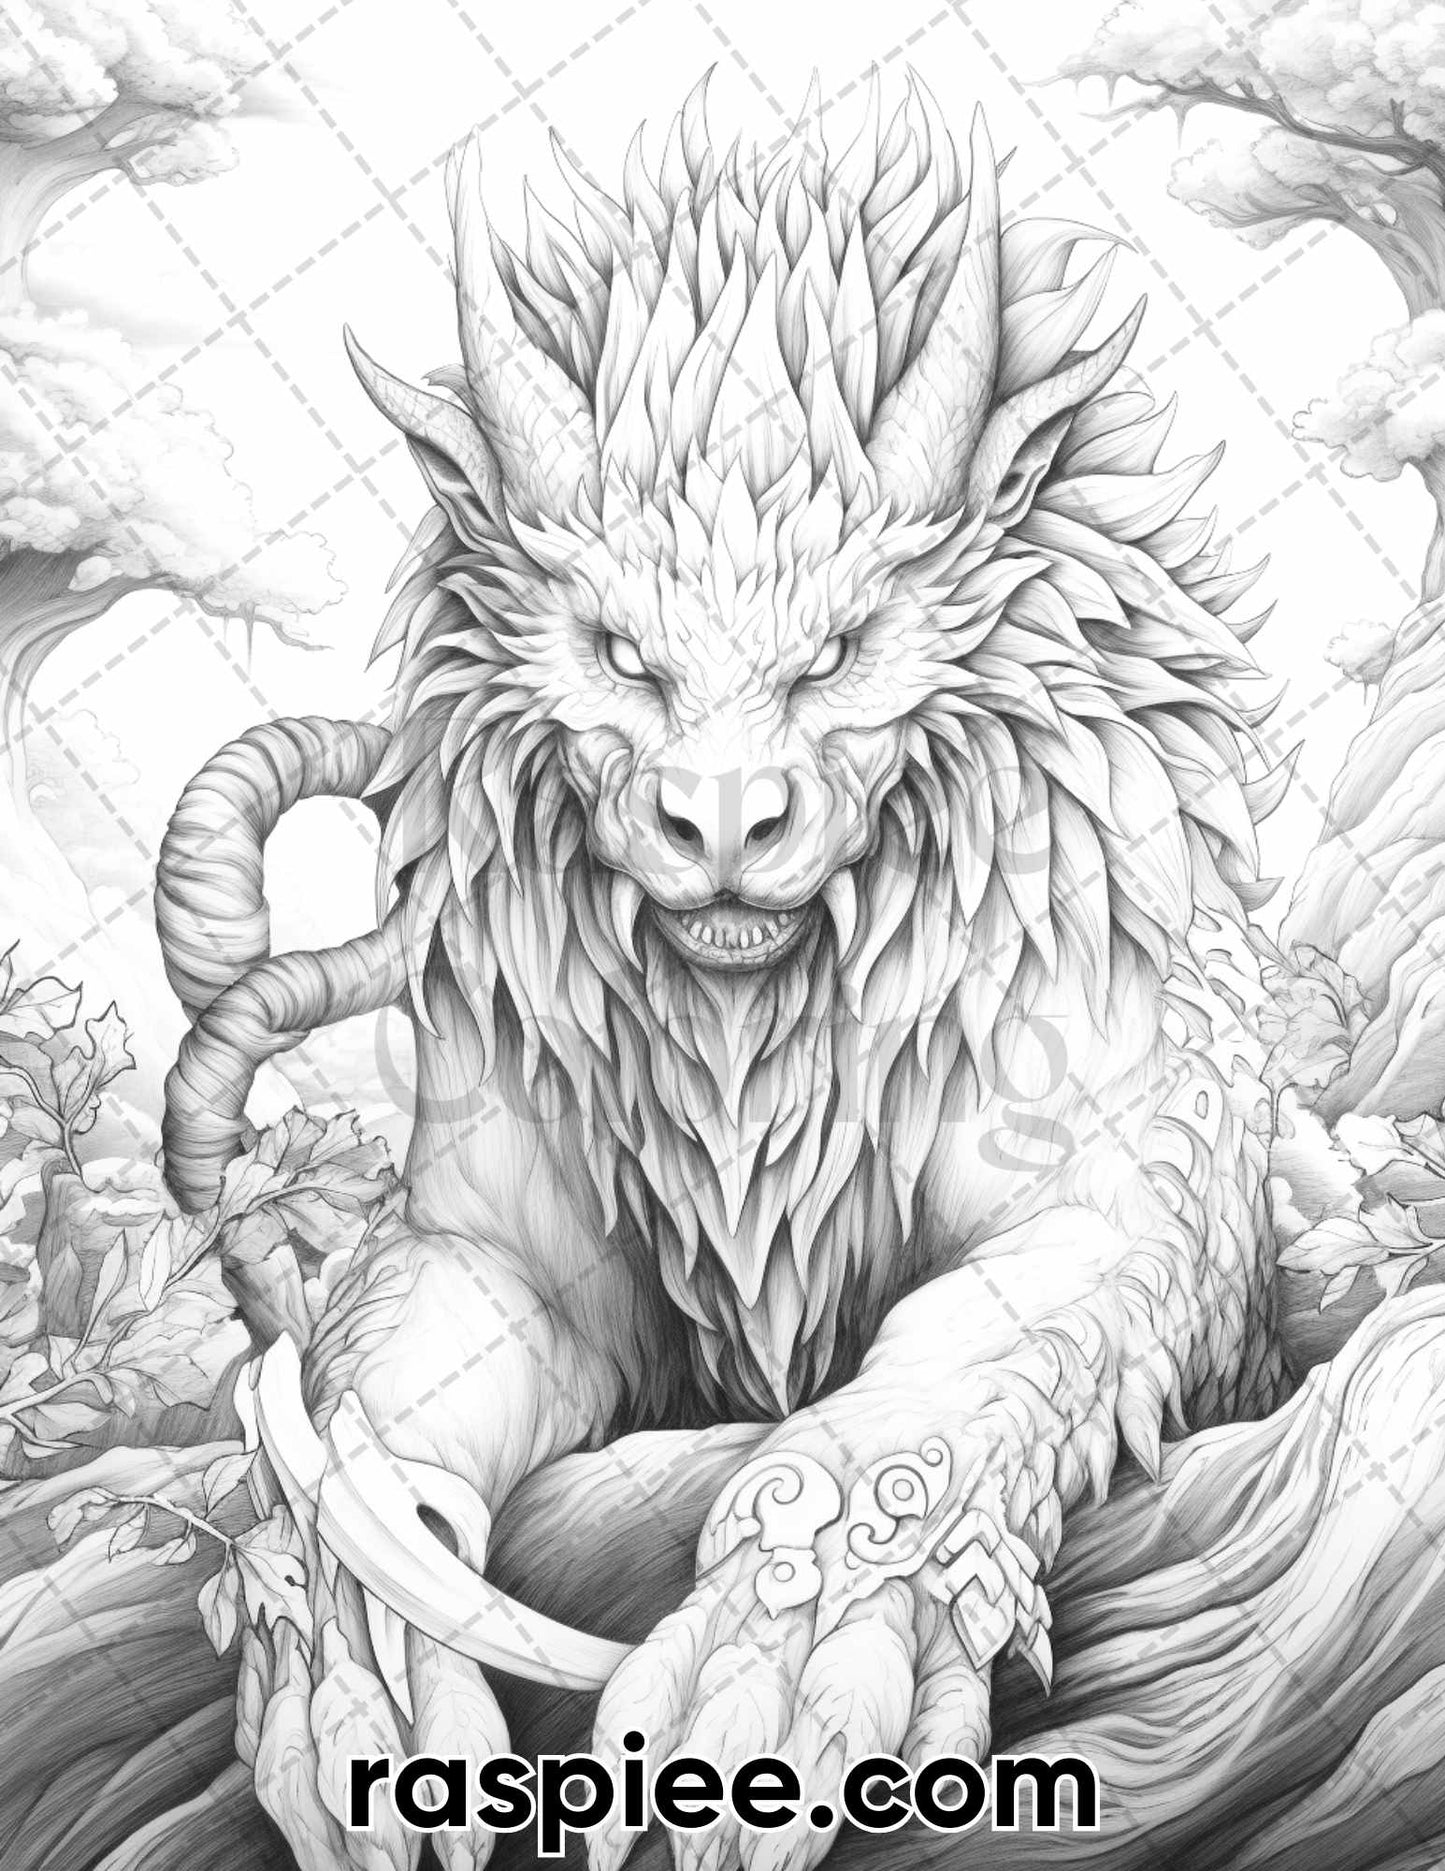 60 Mythical Creatures Grayscale Coloring Pages for Adults, Printable PDF Instant Download